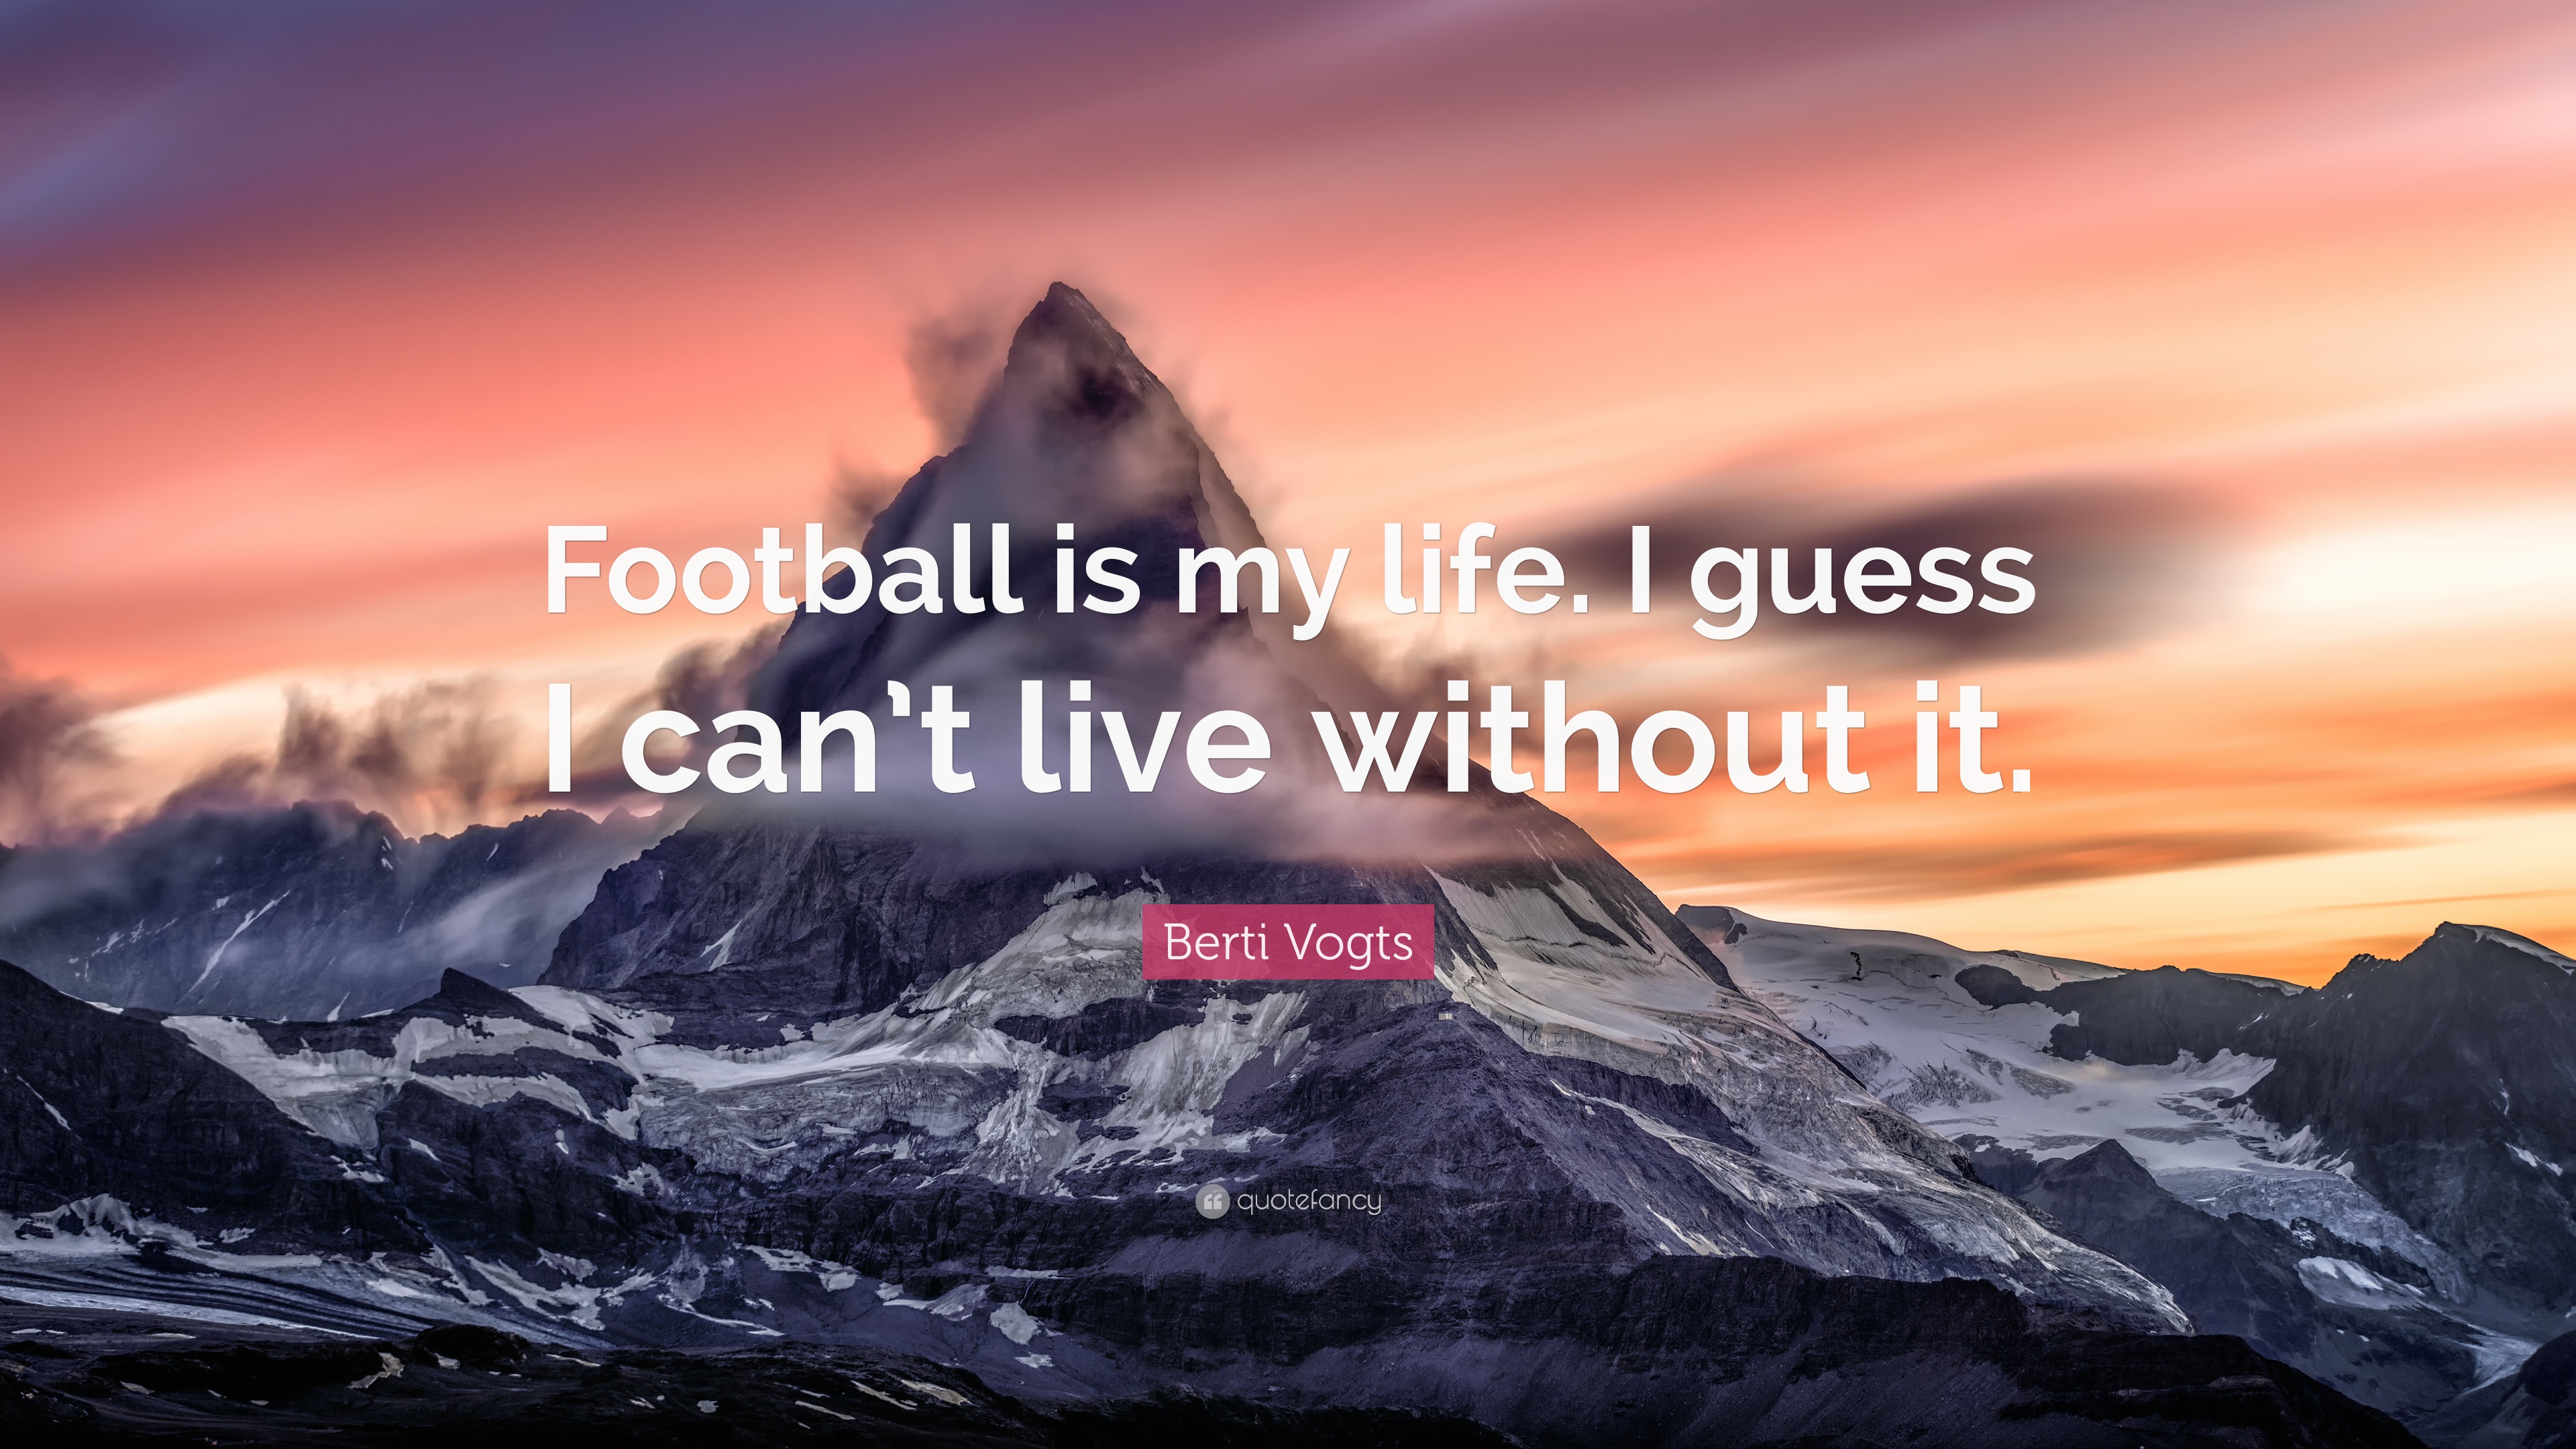 Berti Vogts Quote: “Football is my life. I guess I can't live without it.”